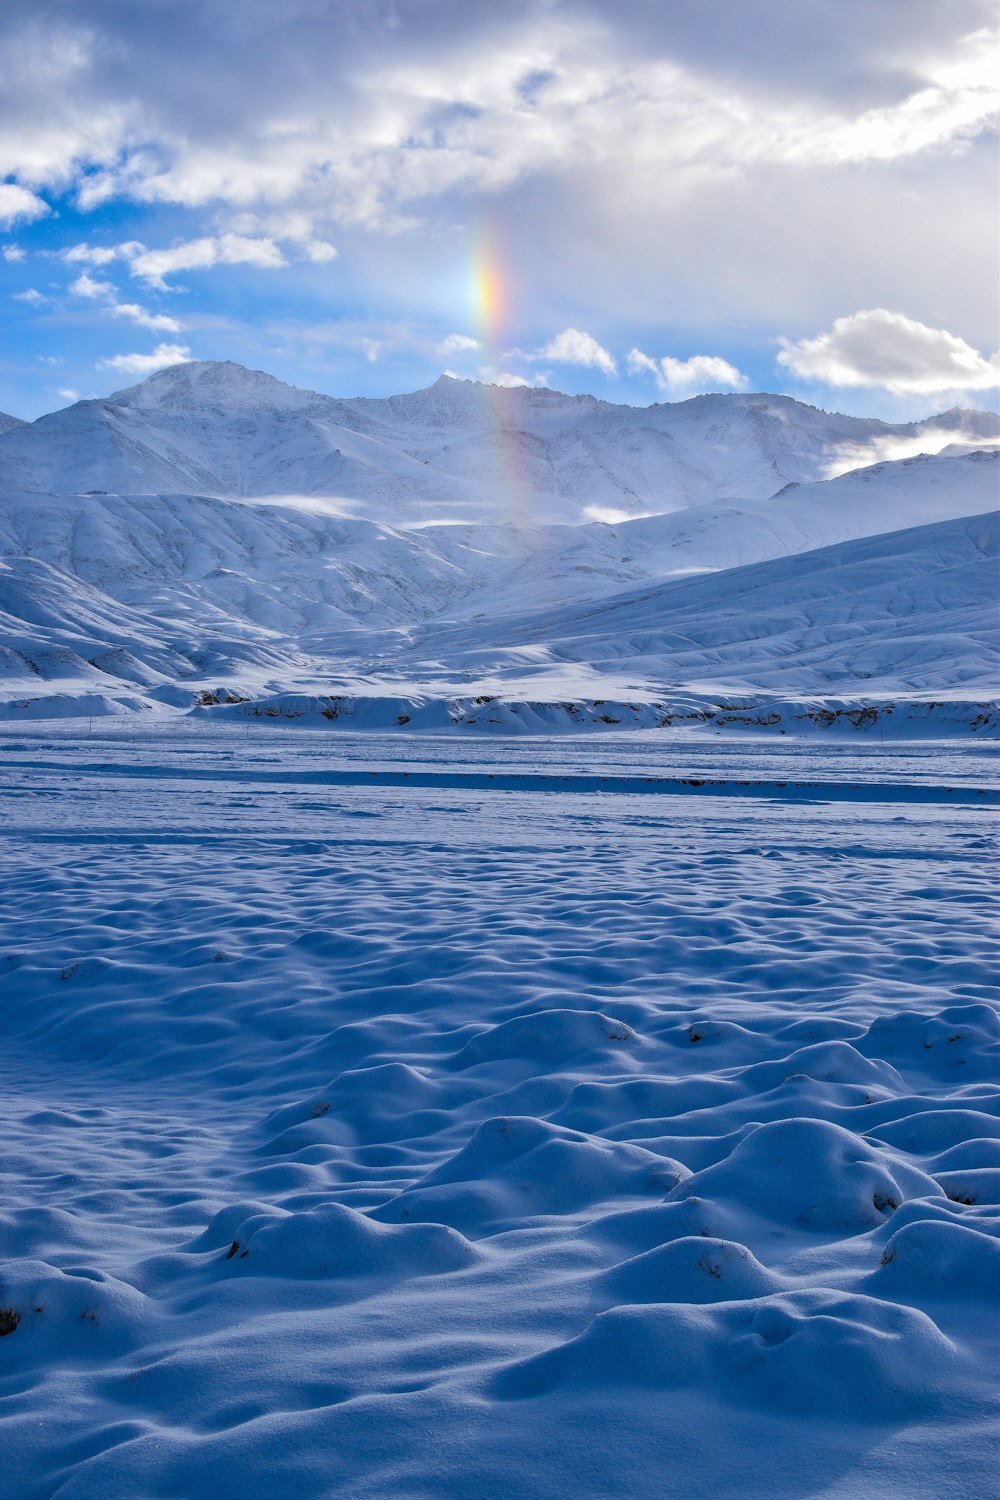 a rainbow shines in the sky over a snowy landscape